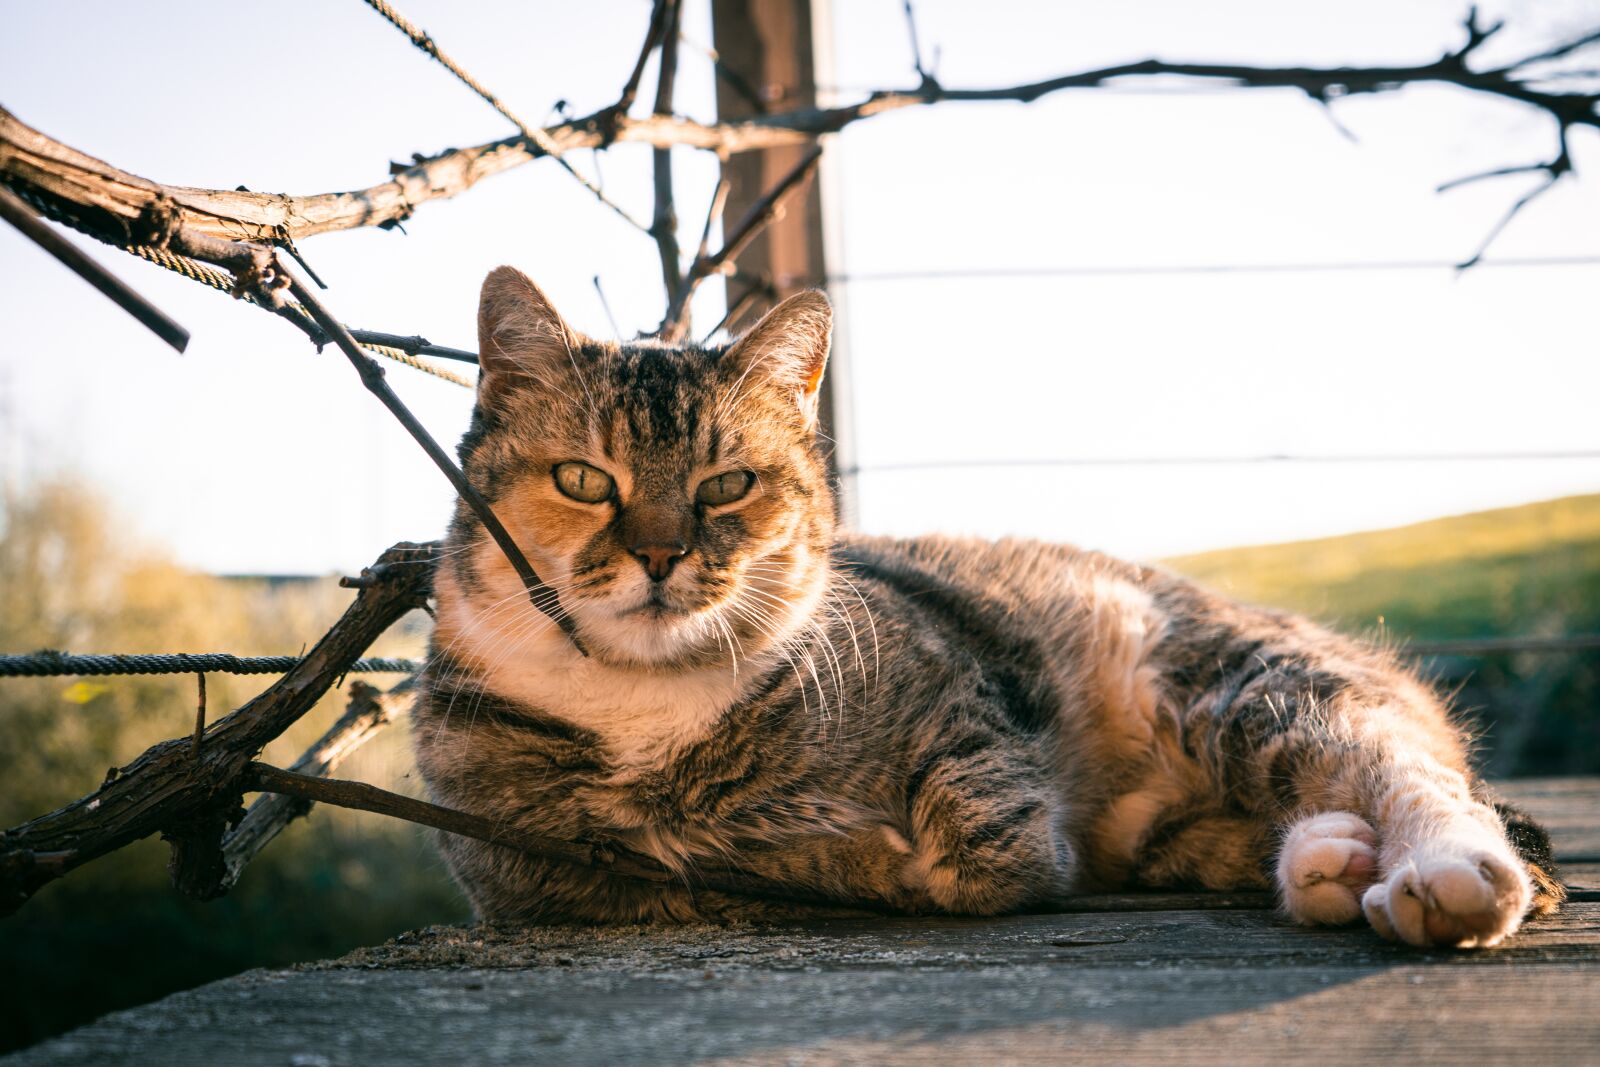 Sony a6500 sample photo. Spring, cat, nature photography